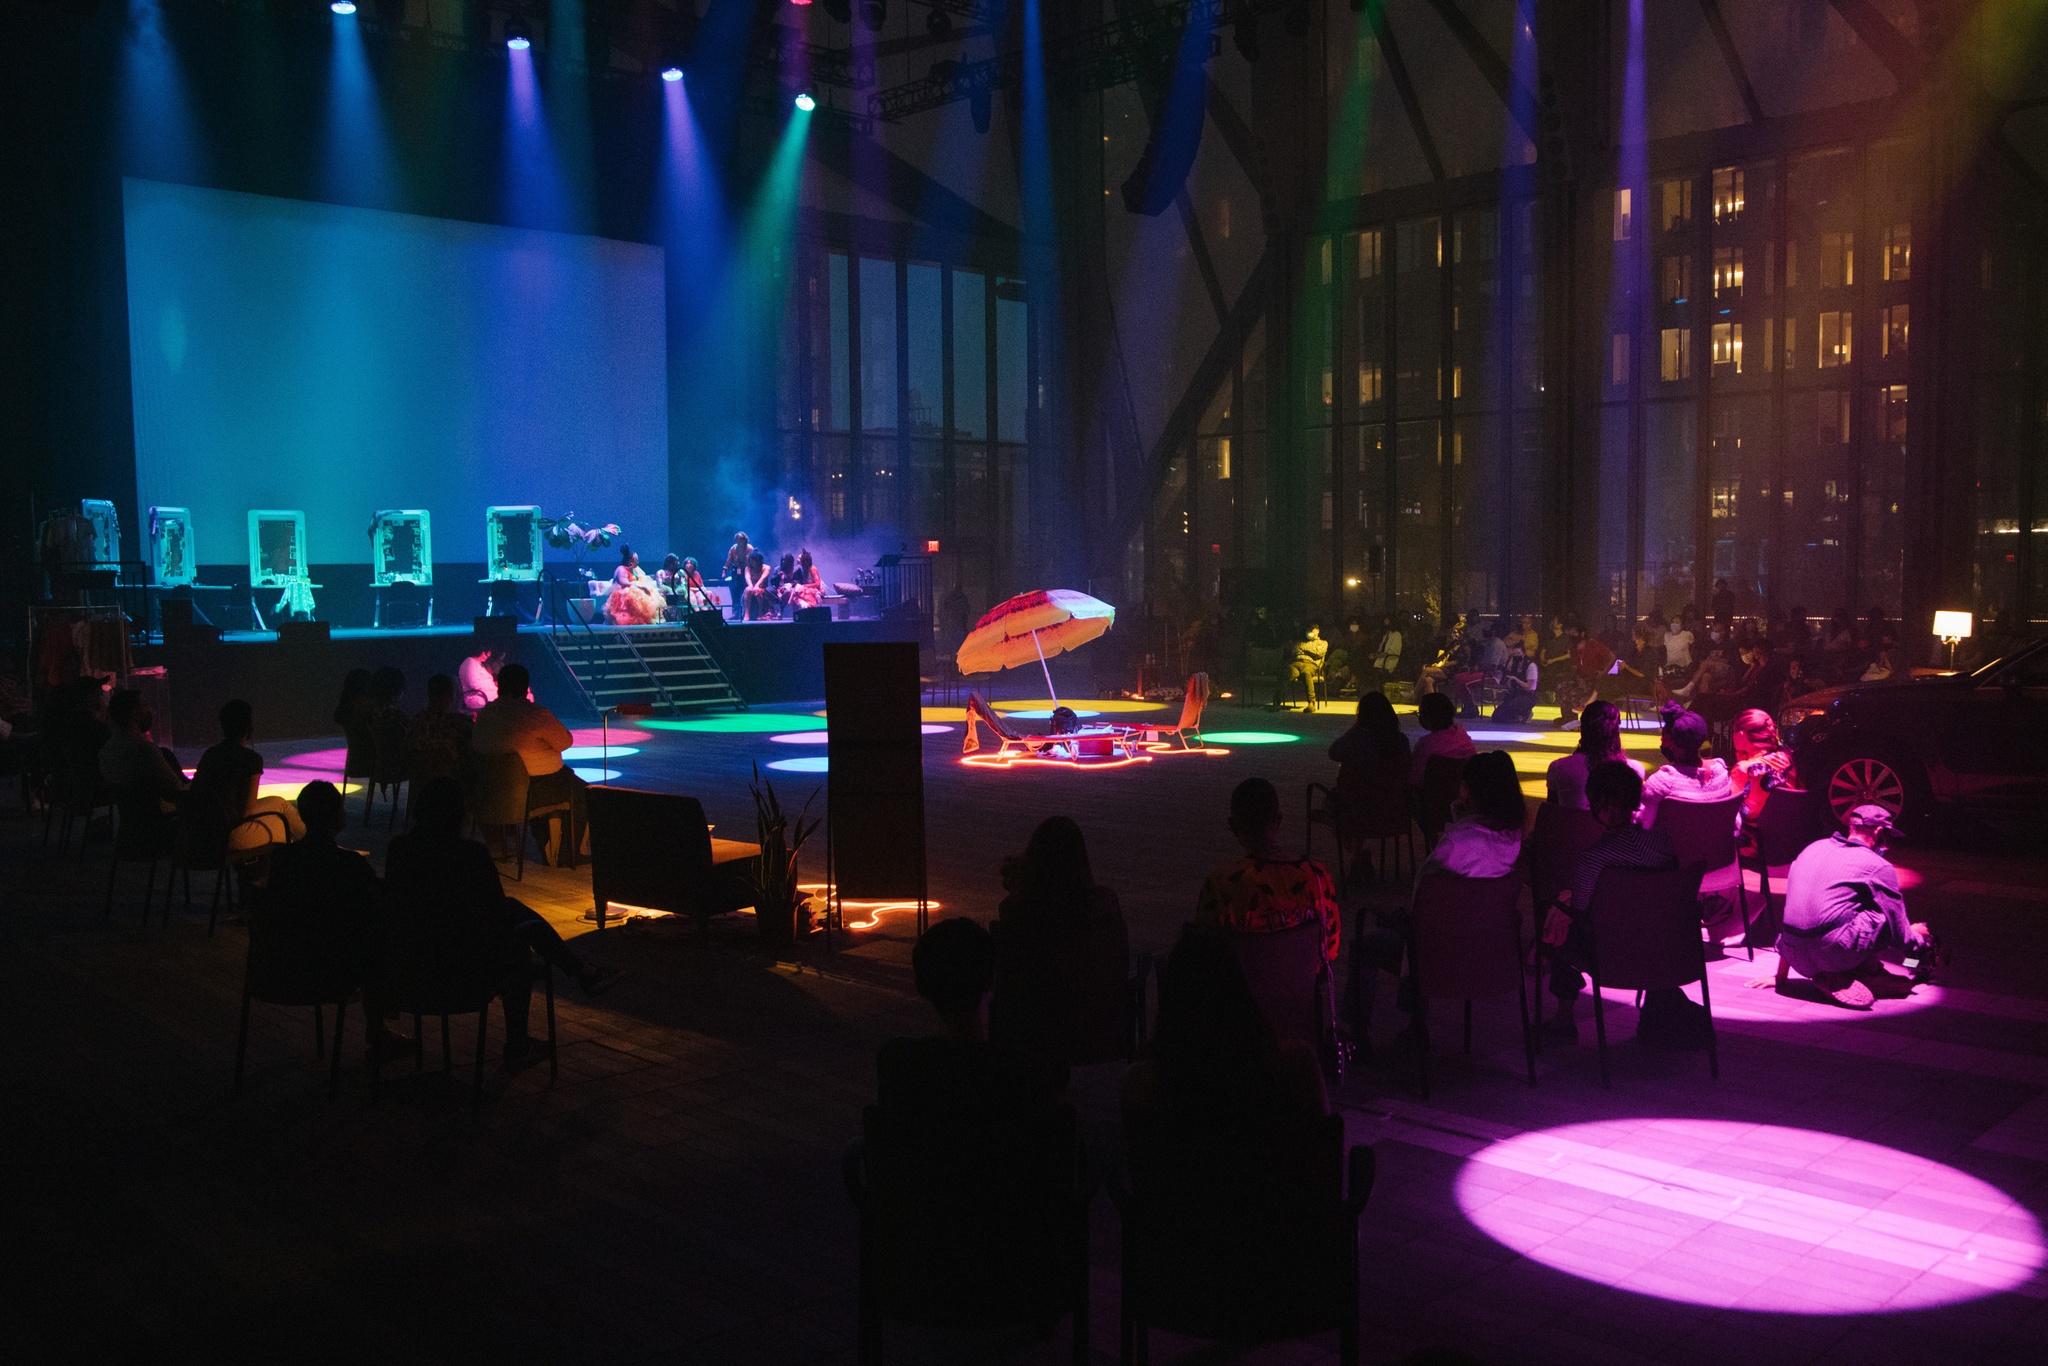 A performance space lit in blue and purple spotlights. The lights illuminate vignettes including a beach chair and umbrella as well as a stage with makeup vanities lining it along the back.